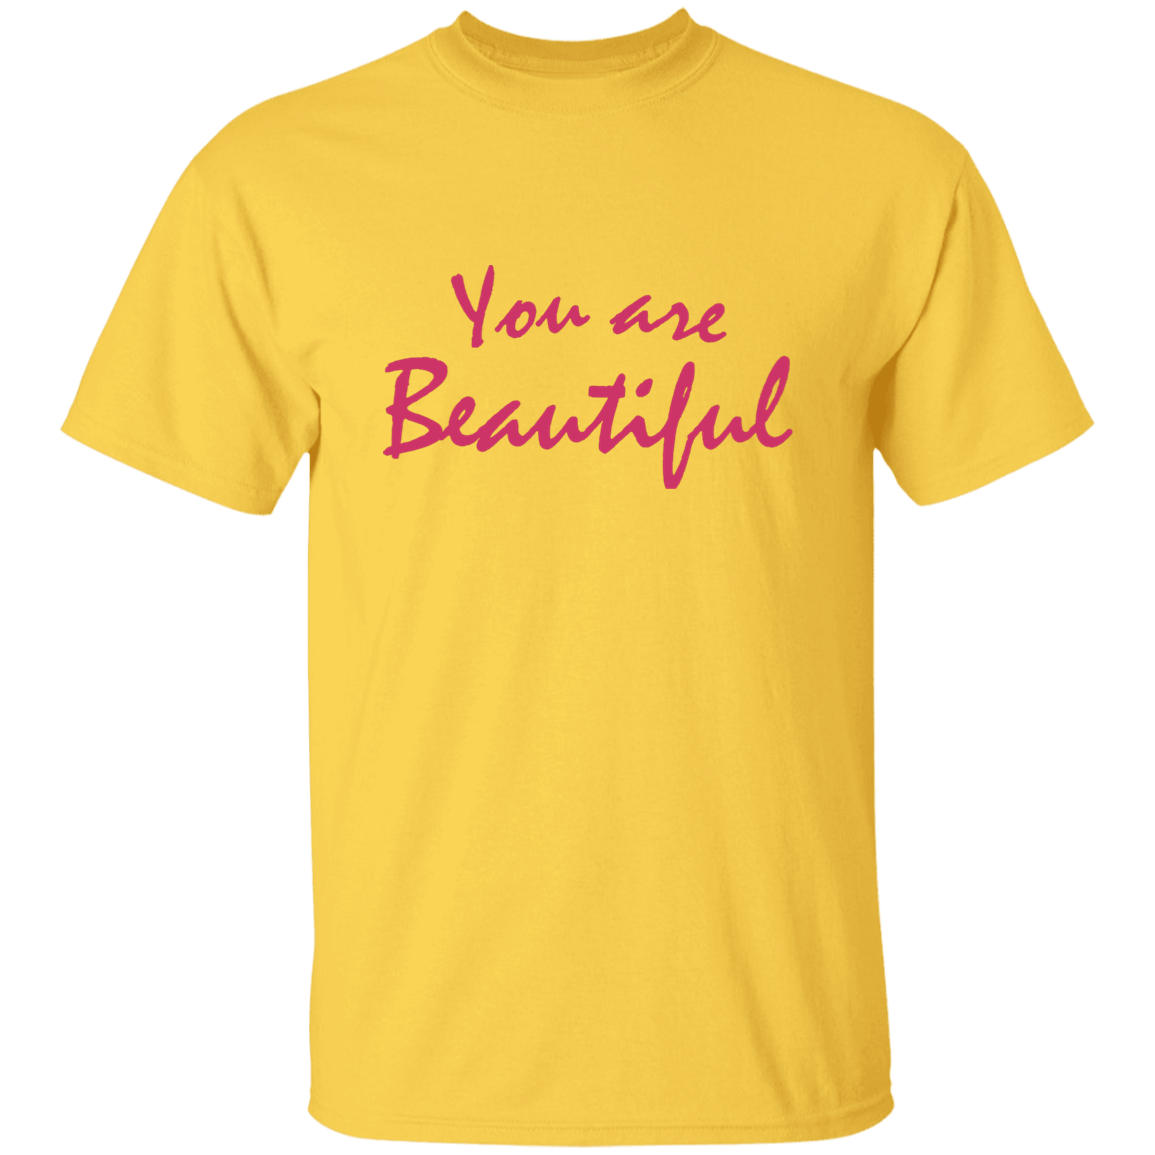 You Are Beautiful | Adult Unisex T-Shirt